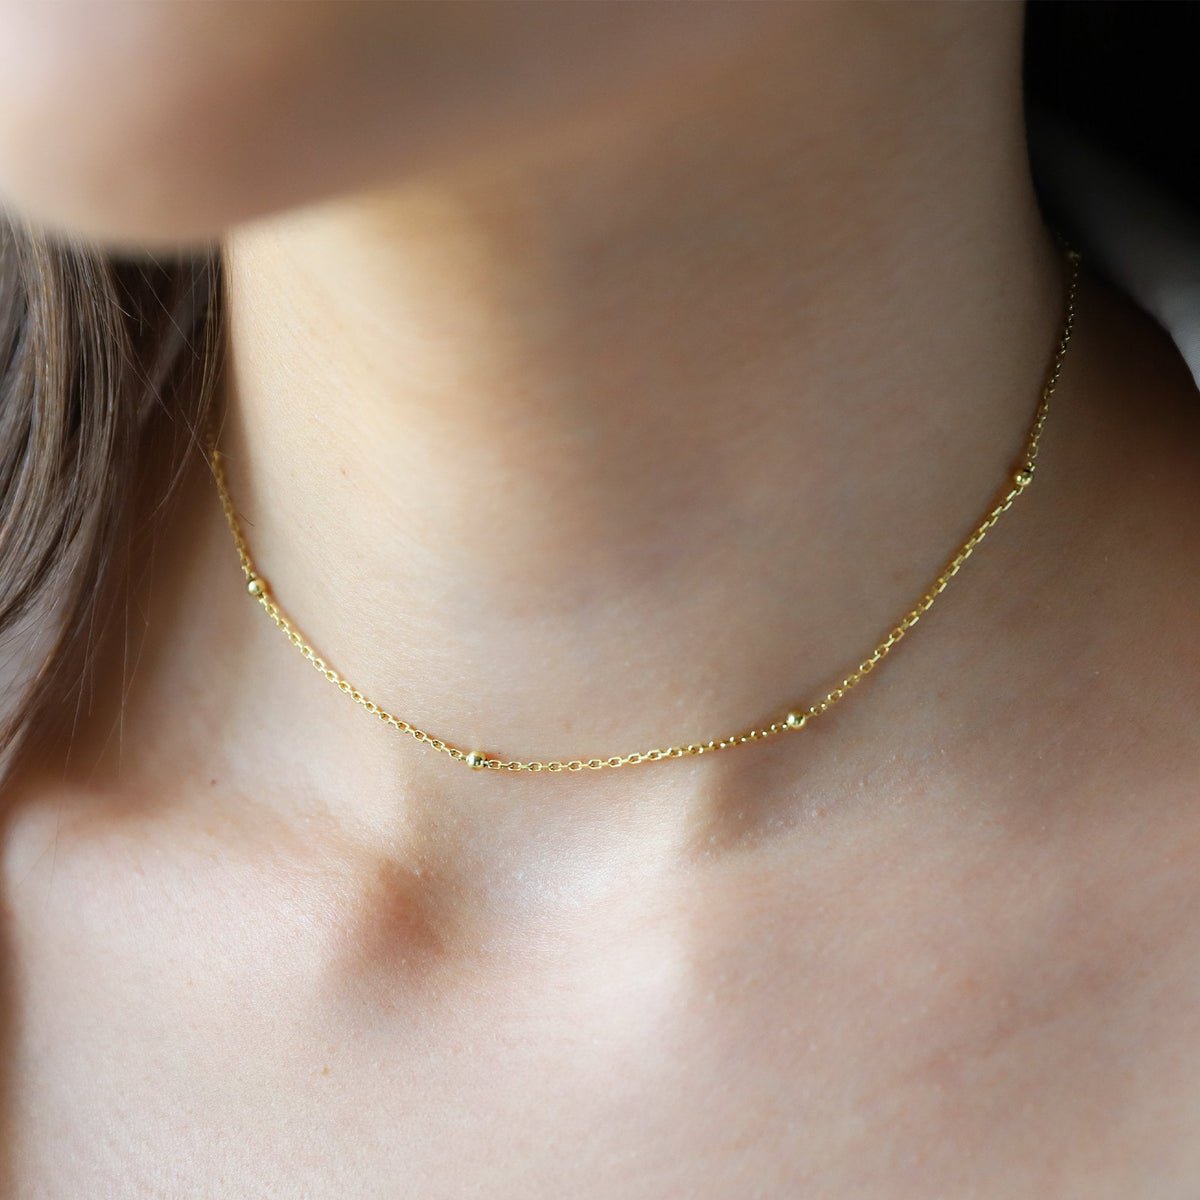 Italian Ball Bead Gold Chain Necklace • Stylish Silver Dainty Chain Necklace • Gift for Mom • Birthday Gift